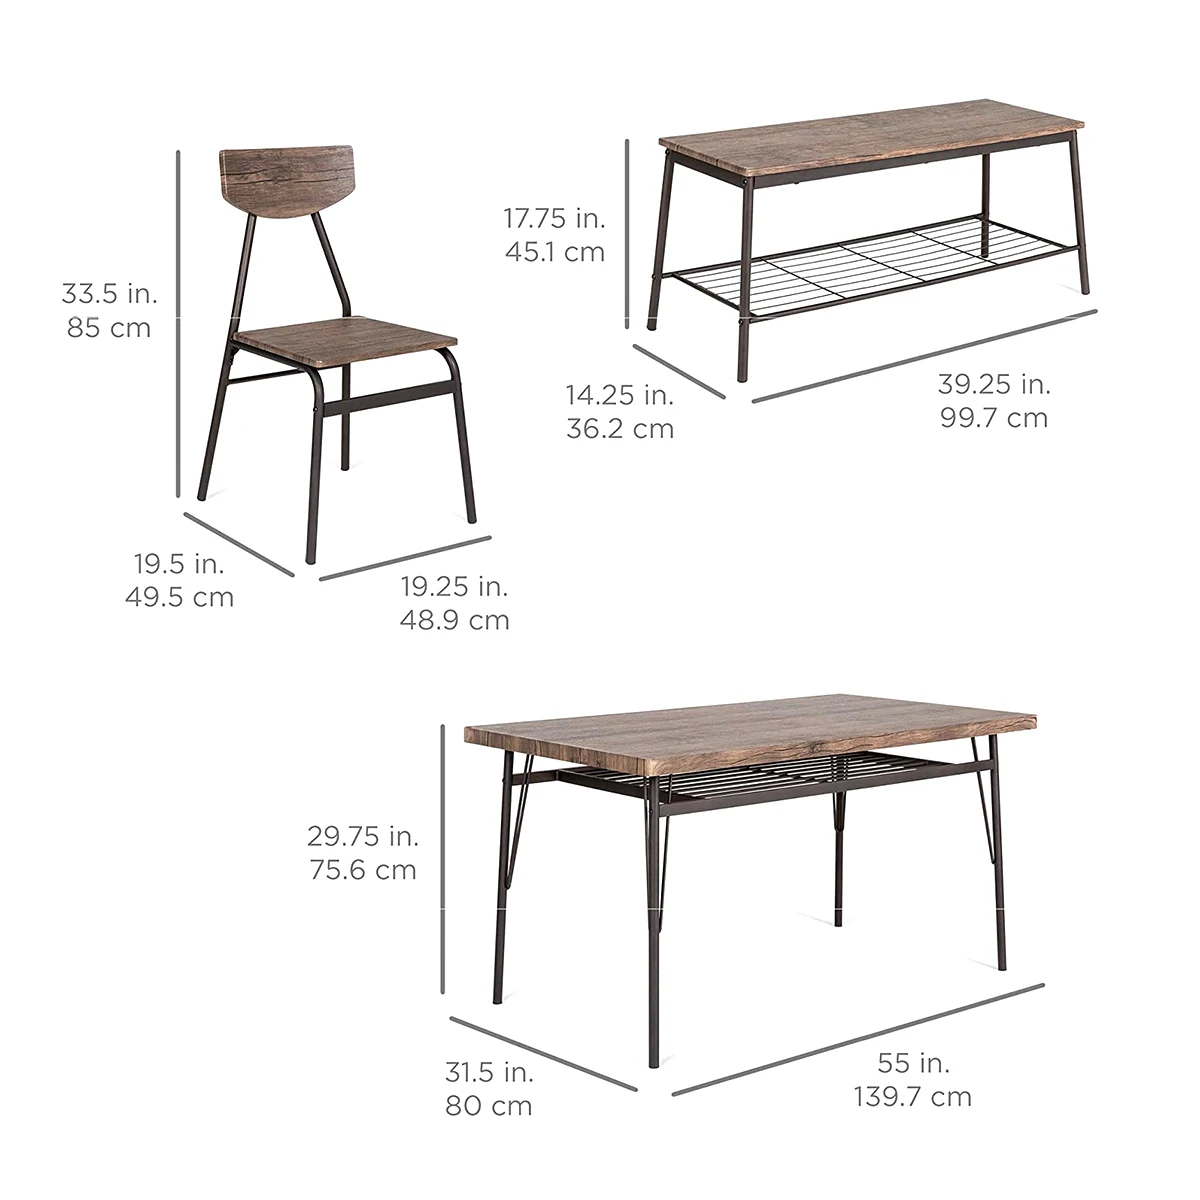 New Product Factory Price Modern Wooden Dining Tables and Chairs Sets with Metal Shelf and Legs for Home Dining Room